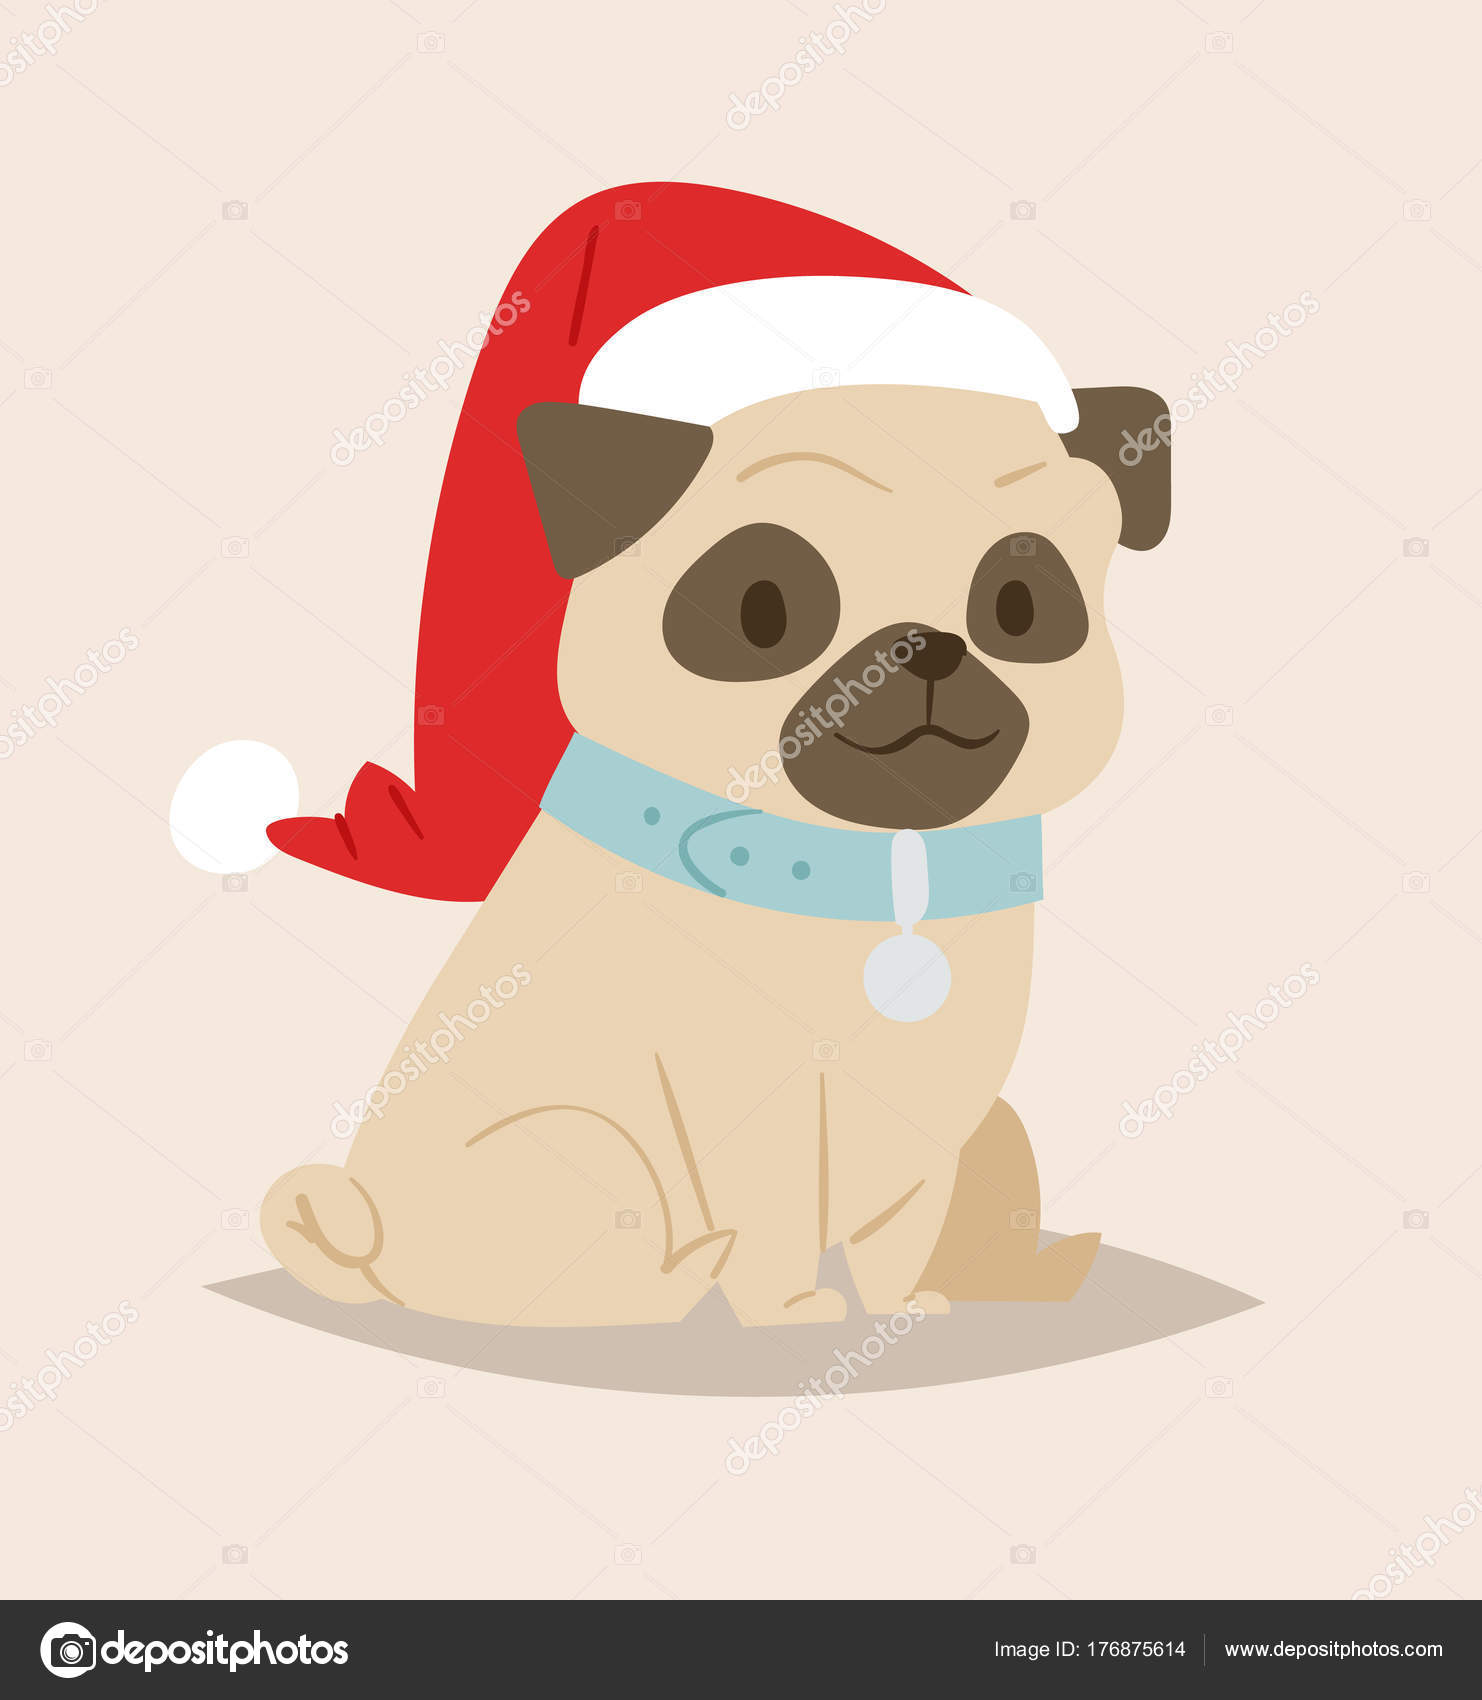 Christmas Dog Vector Cute Cartoon Puppy Characters Illustration Home Pets Doggy Different Xmas Celebrate Poses In Santa Red Hat Vector Image By C Vectorshow Vector Stock 176875614